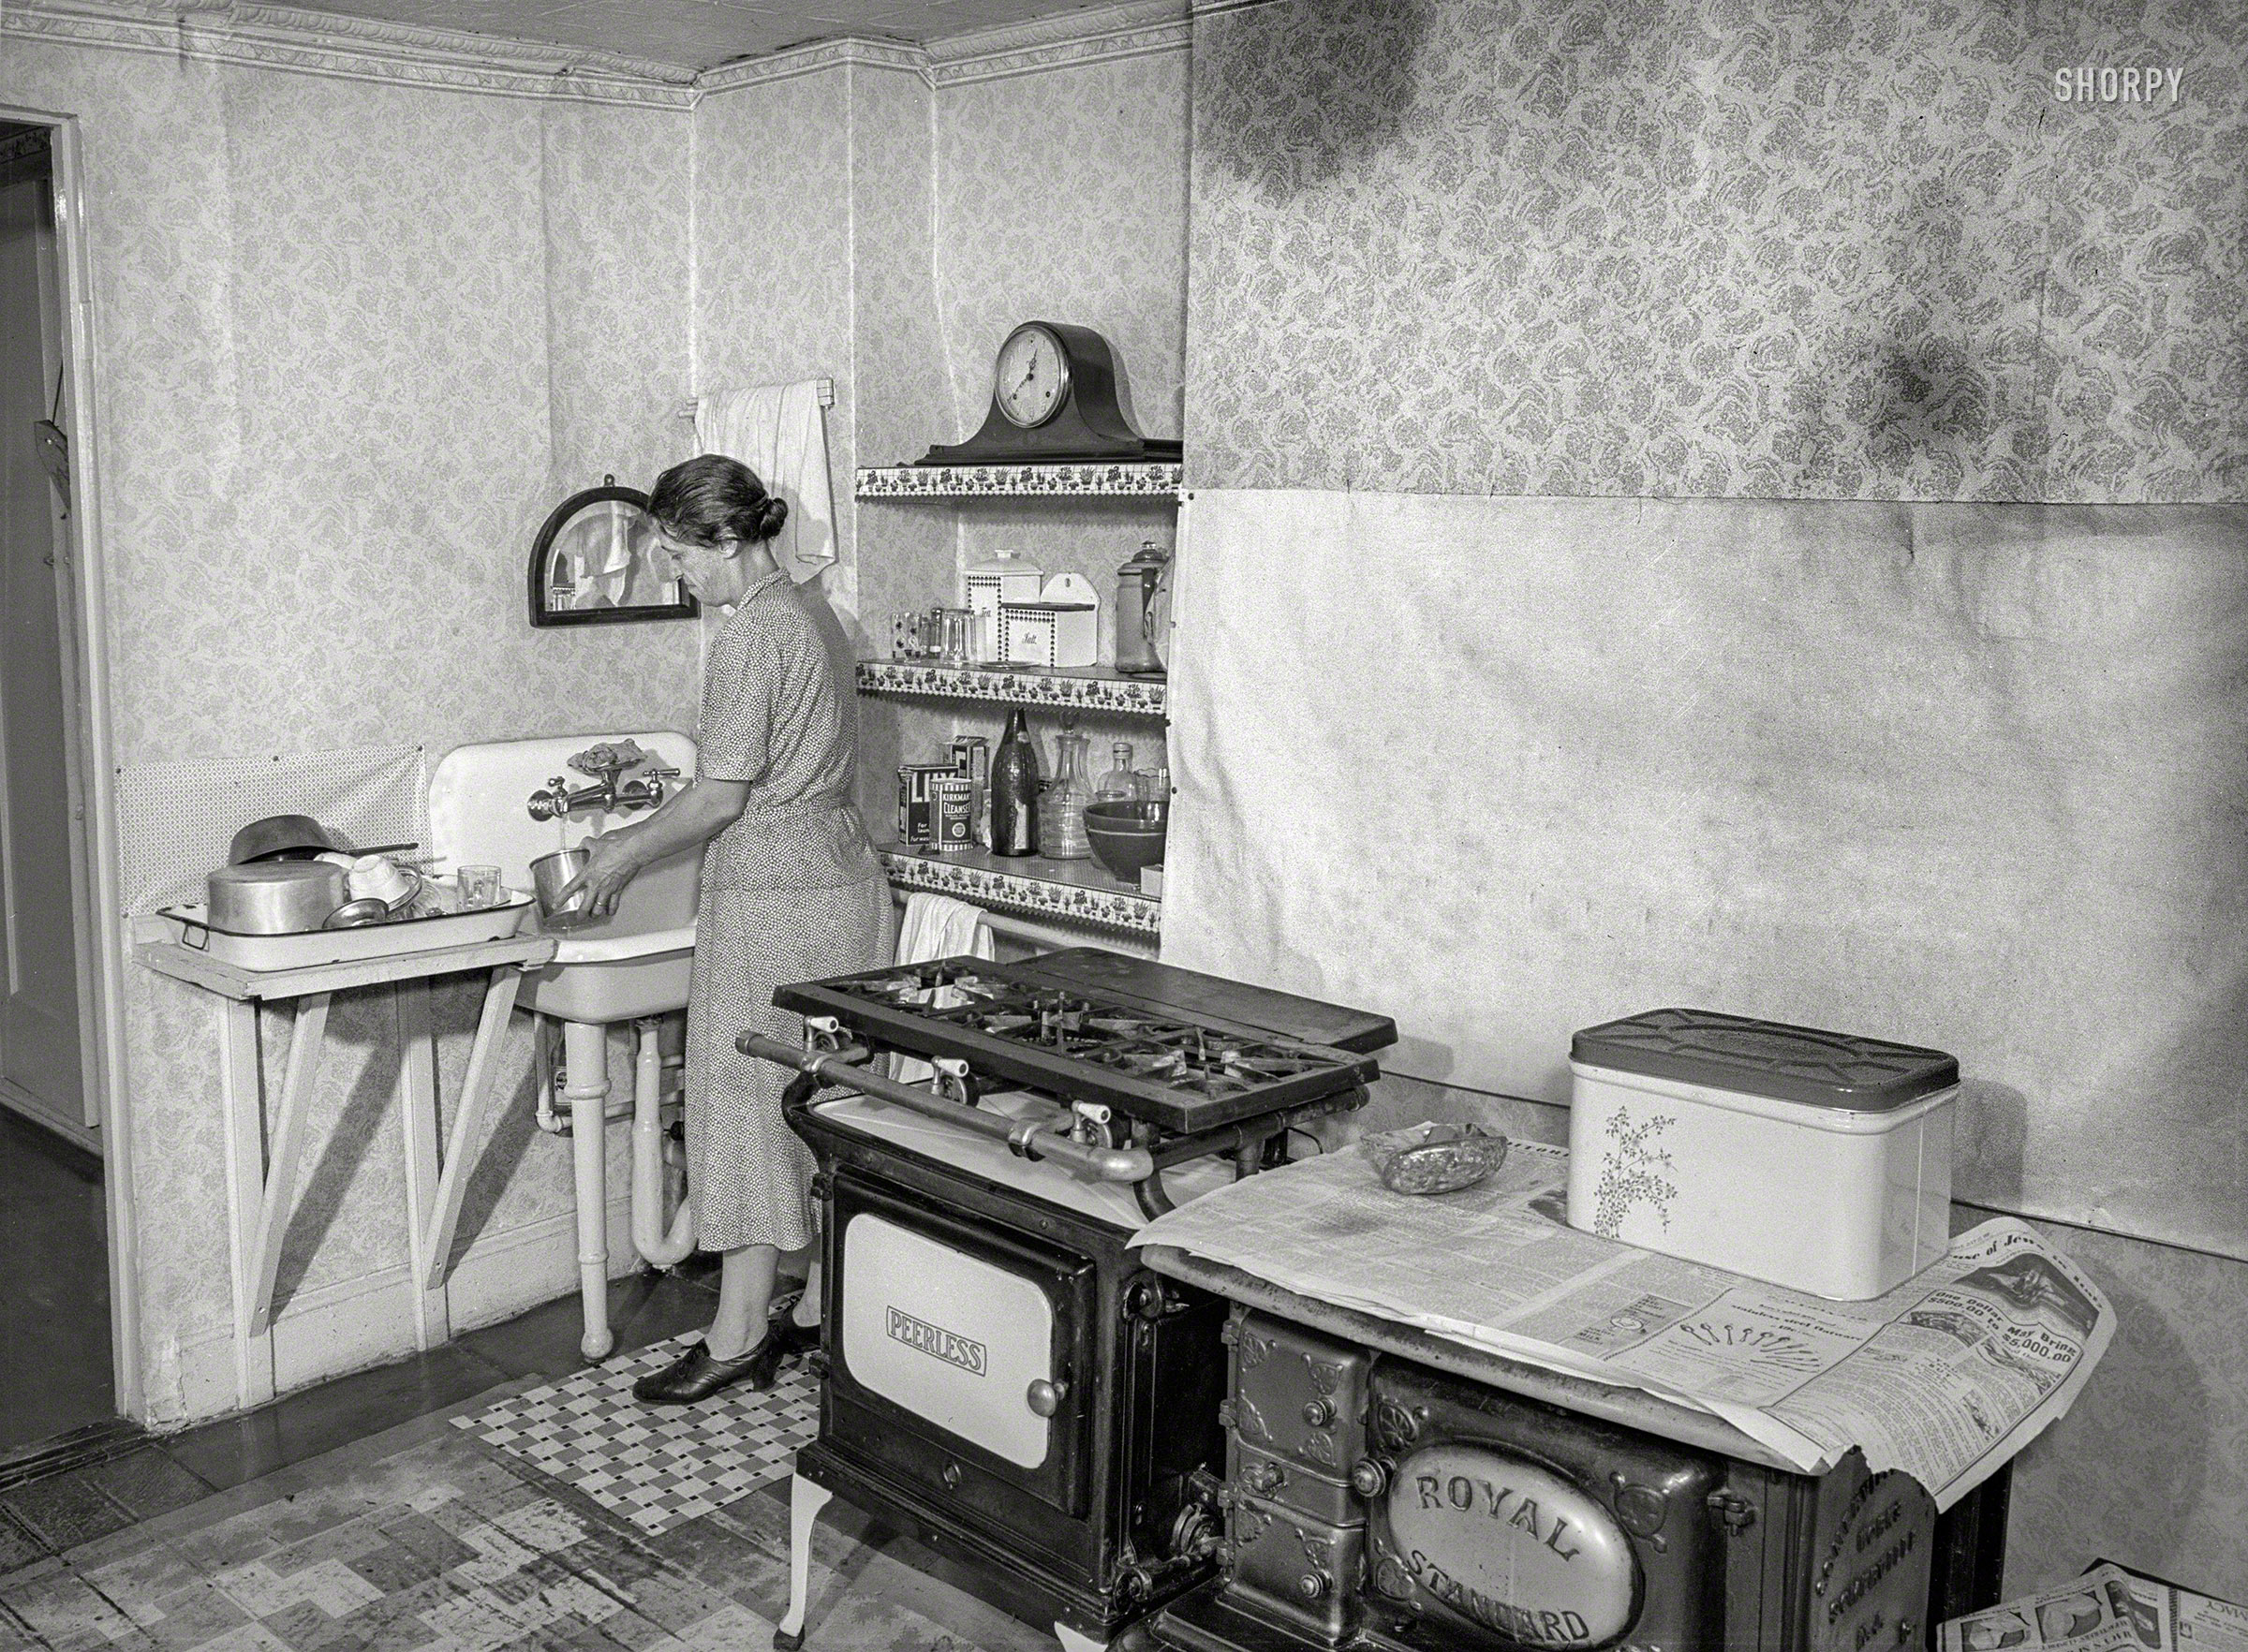 1938. "New York, New York. John Montefiori's sister-in-law in her kitchen at 340 East 63rd Street. Mr. Montefiori, tenant and janitor of the building, works in a sculpture factory that turns out the little white horses for White Horse Whisky, etc." Medium format acetate negative by Sheldon Dick. View full size.